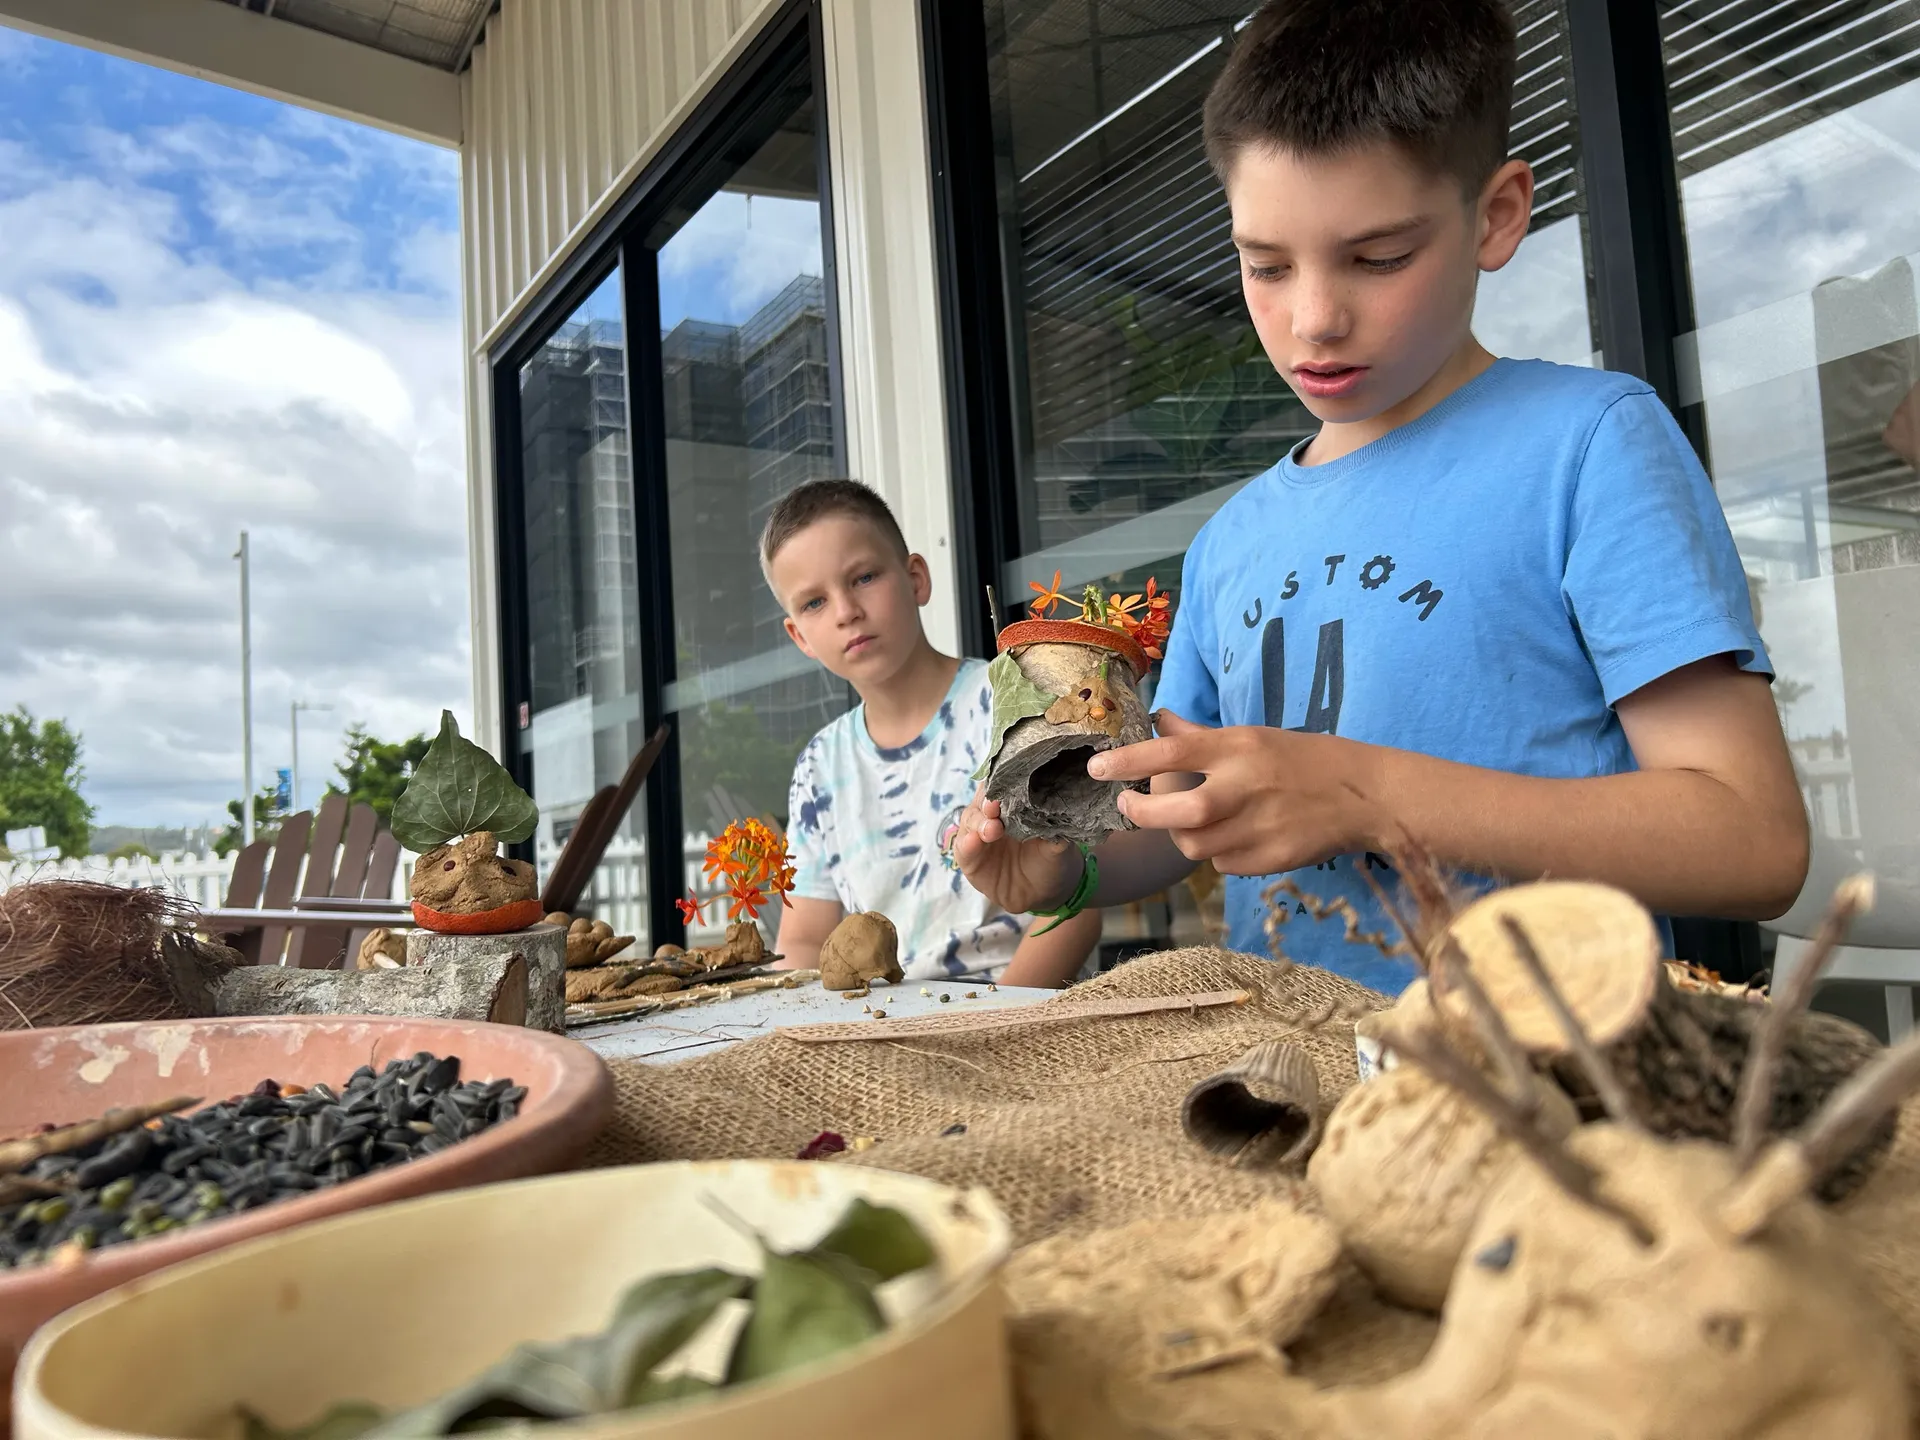 Hunter Quarrell and Mason Quarrell try out the "seed bomb" activity ahead of BiospHERO Day, creating art for the garden that will flourish into new plants.